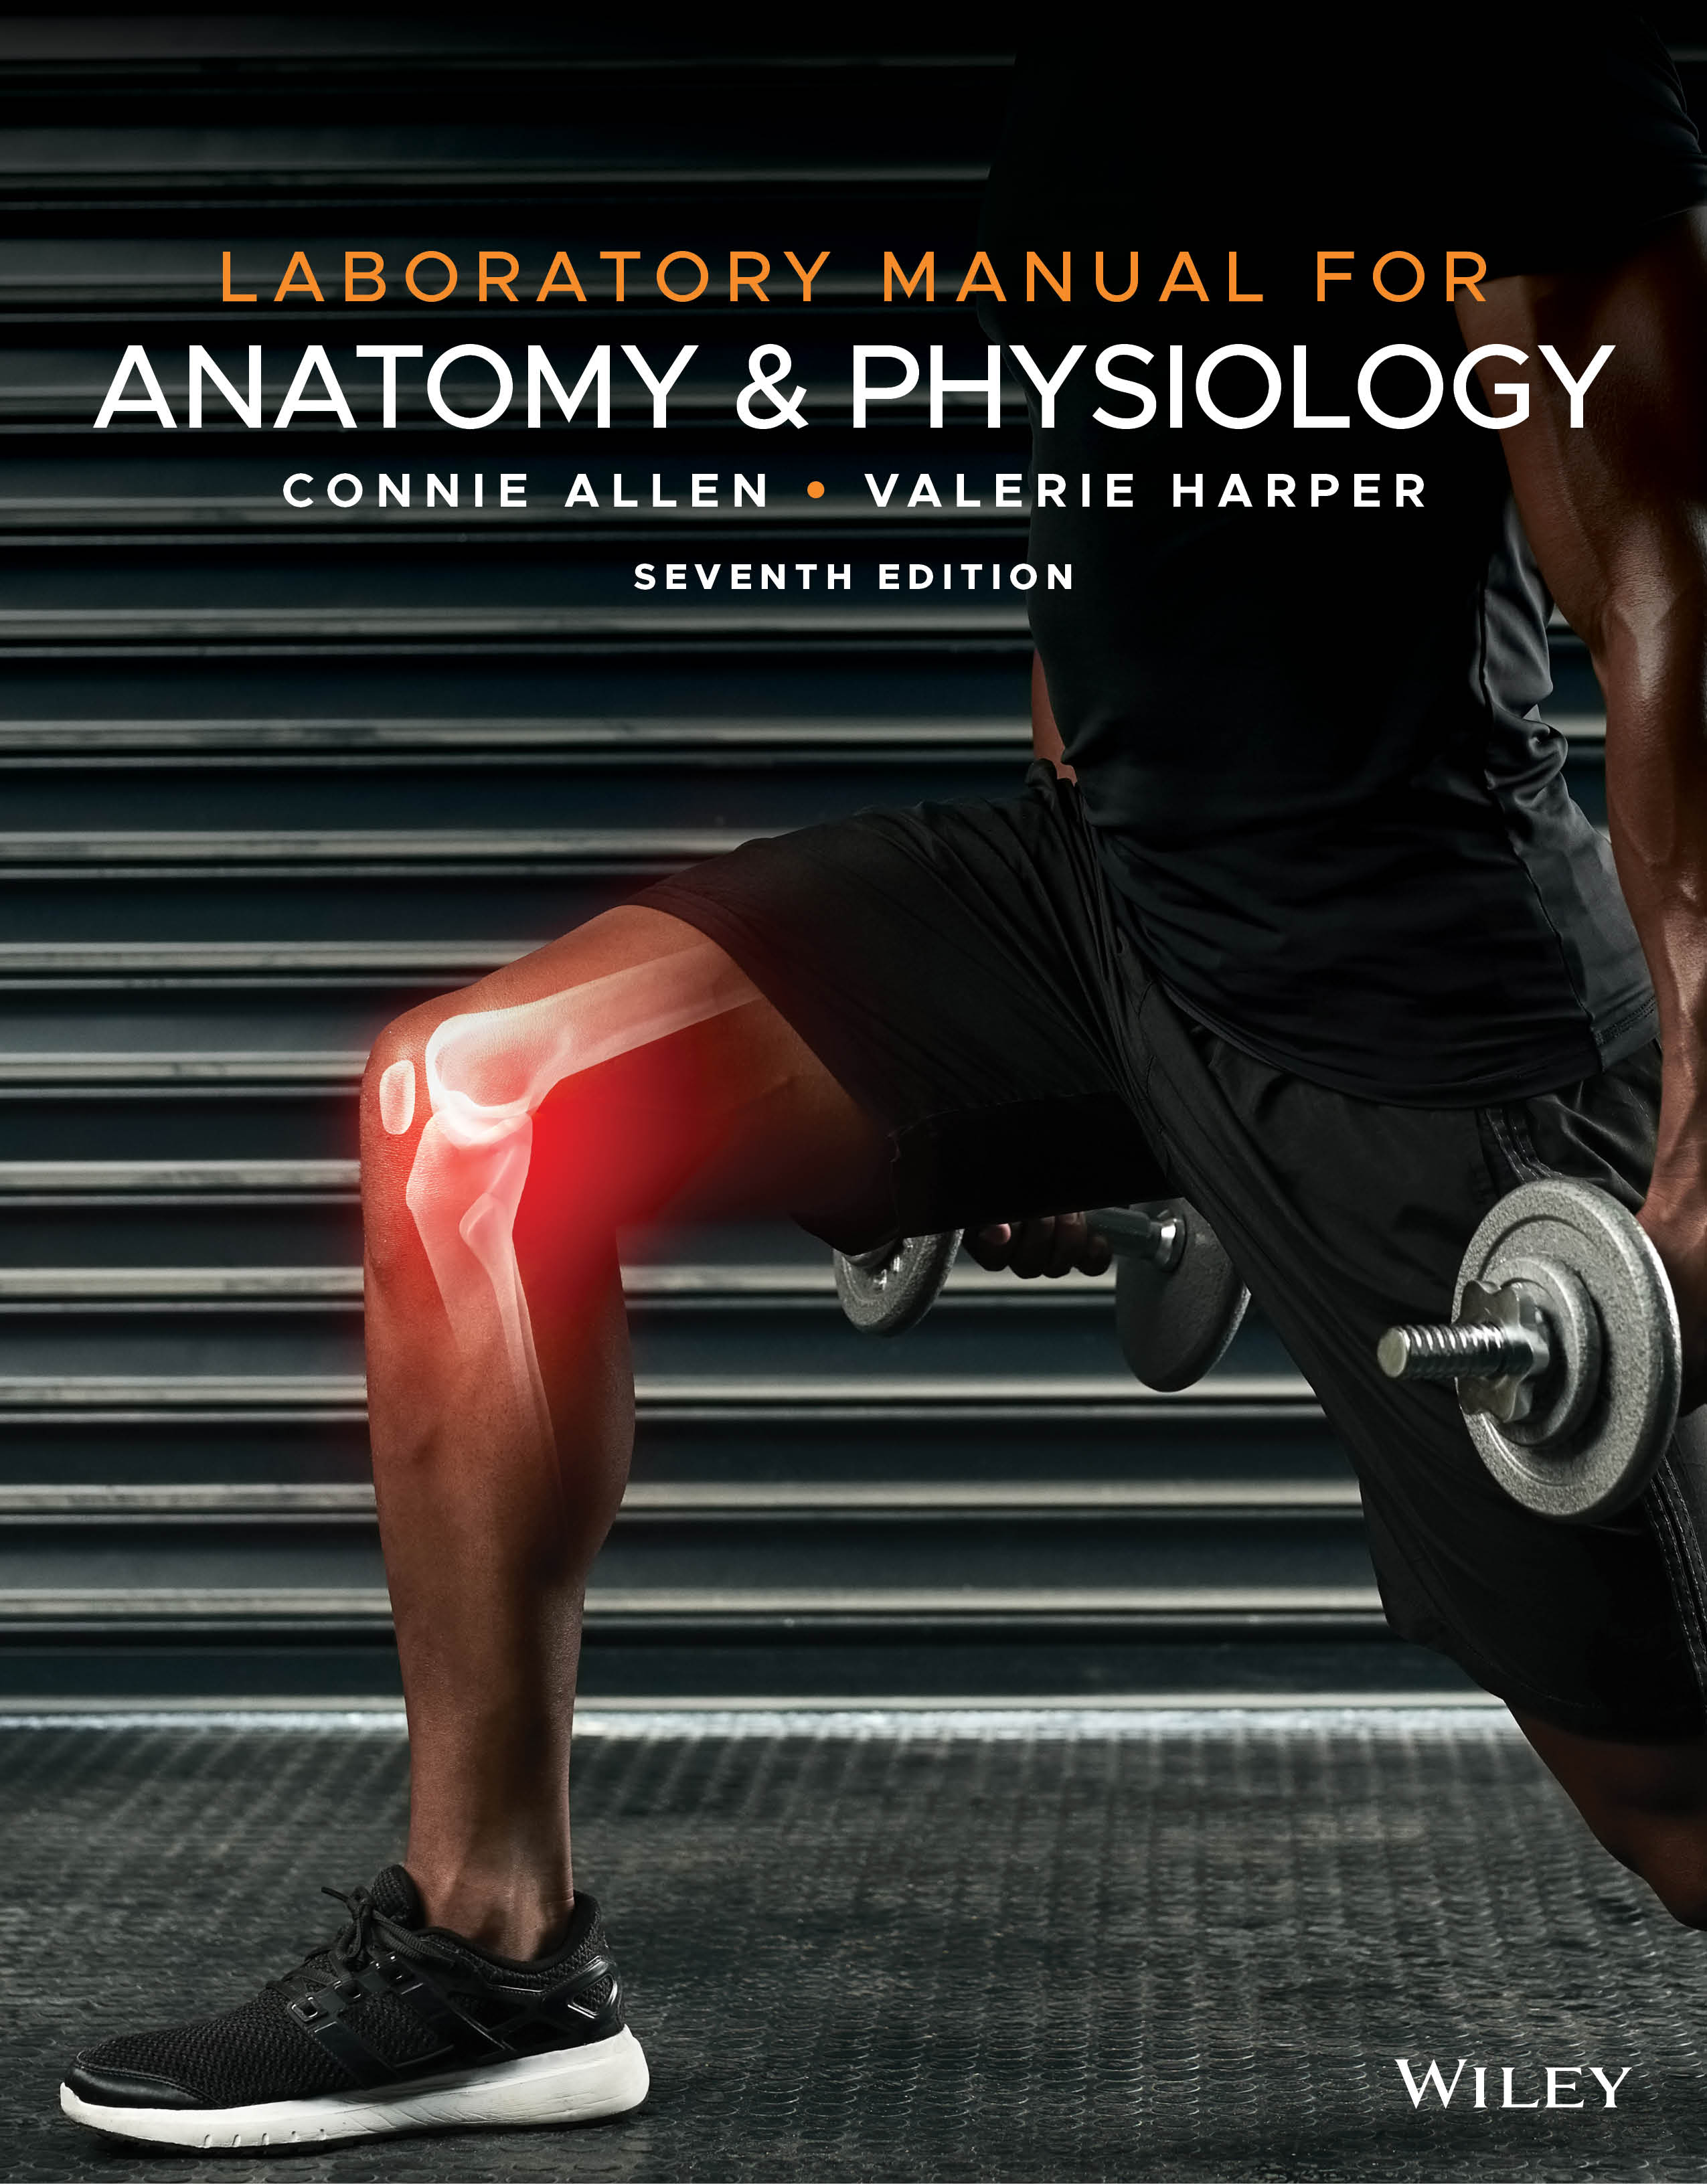 Principles of Anatomy & Physiology, 15th Edition Book Cover